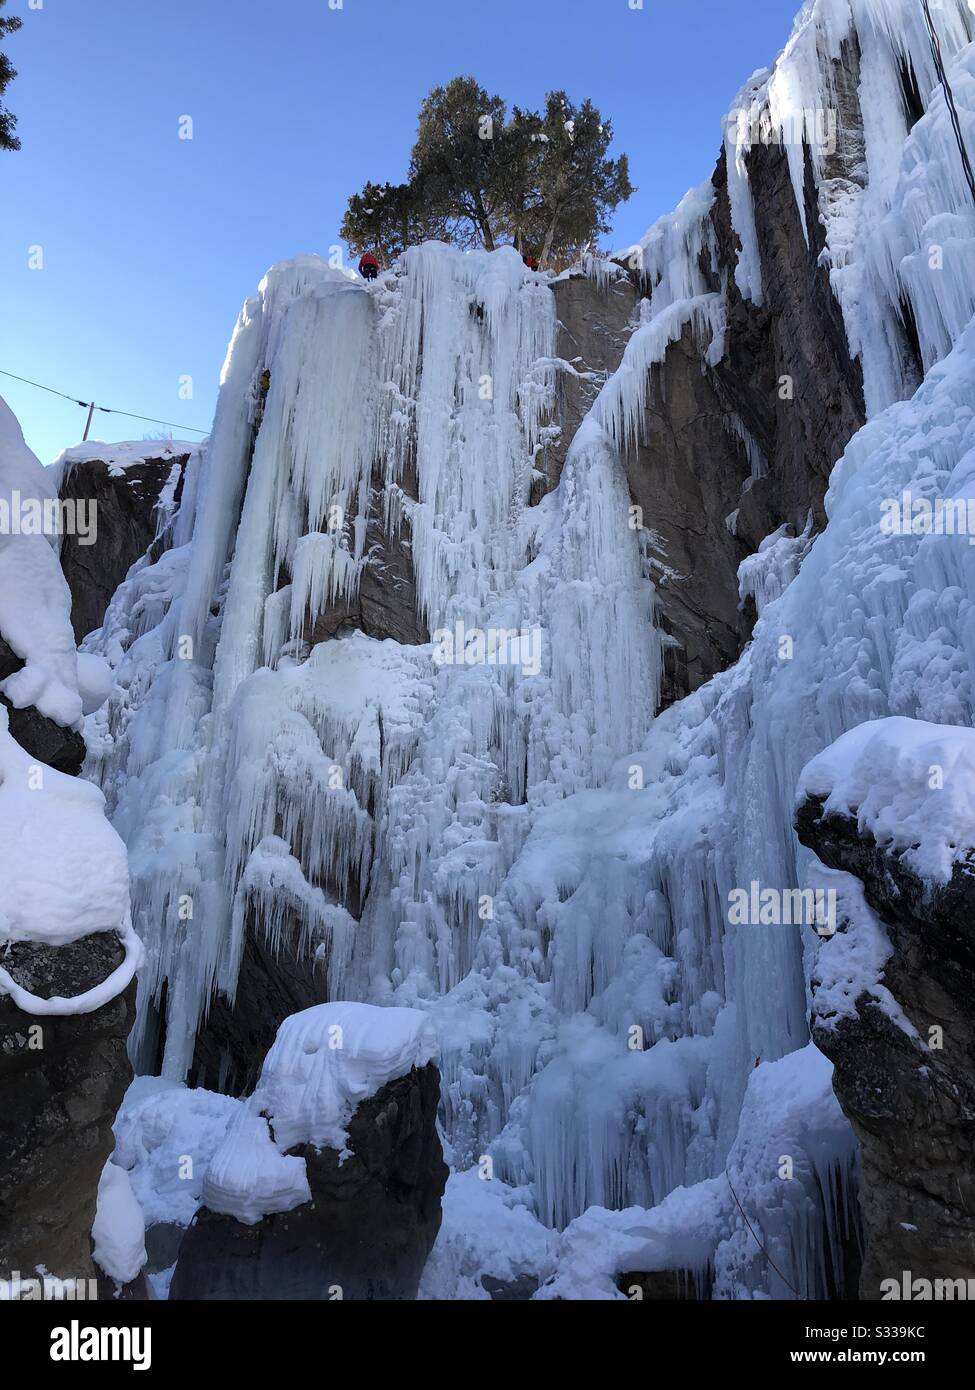 Ouray, Colorado - 05. Januar 2020: Eisfall klettert normalerweise im Winter im Ouray Ice Park in Ouray, Colorado Stockfoto